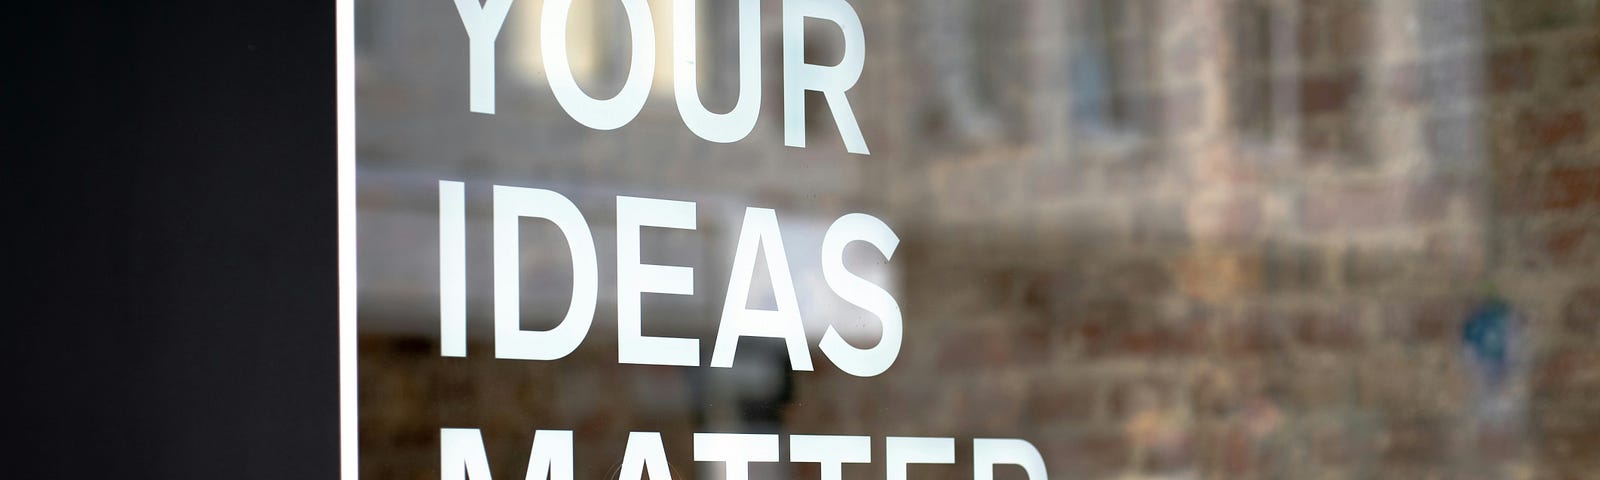 Your Ideas Matter Write Them Down